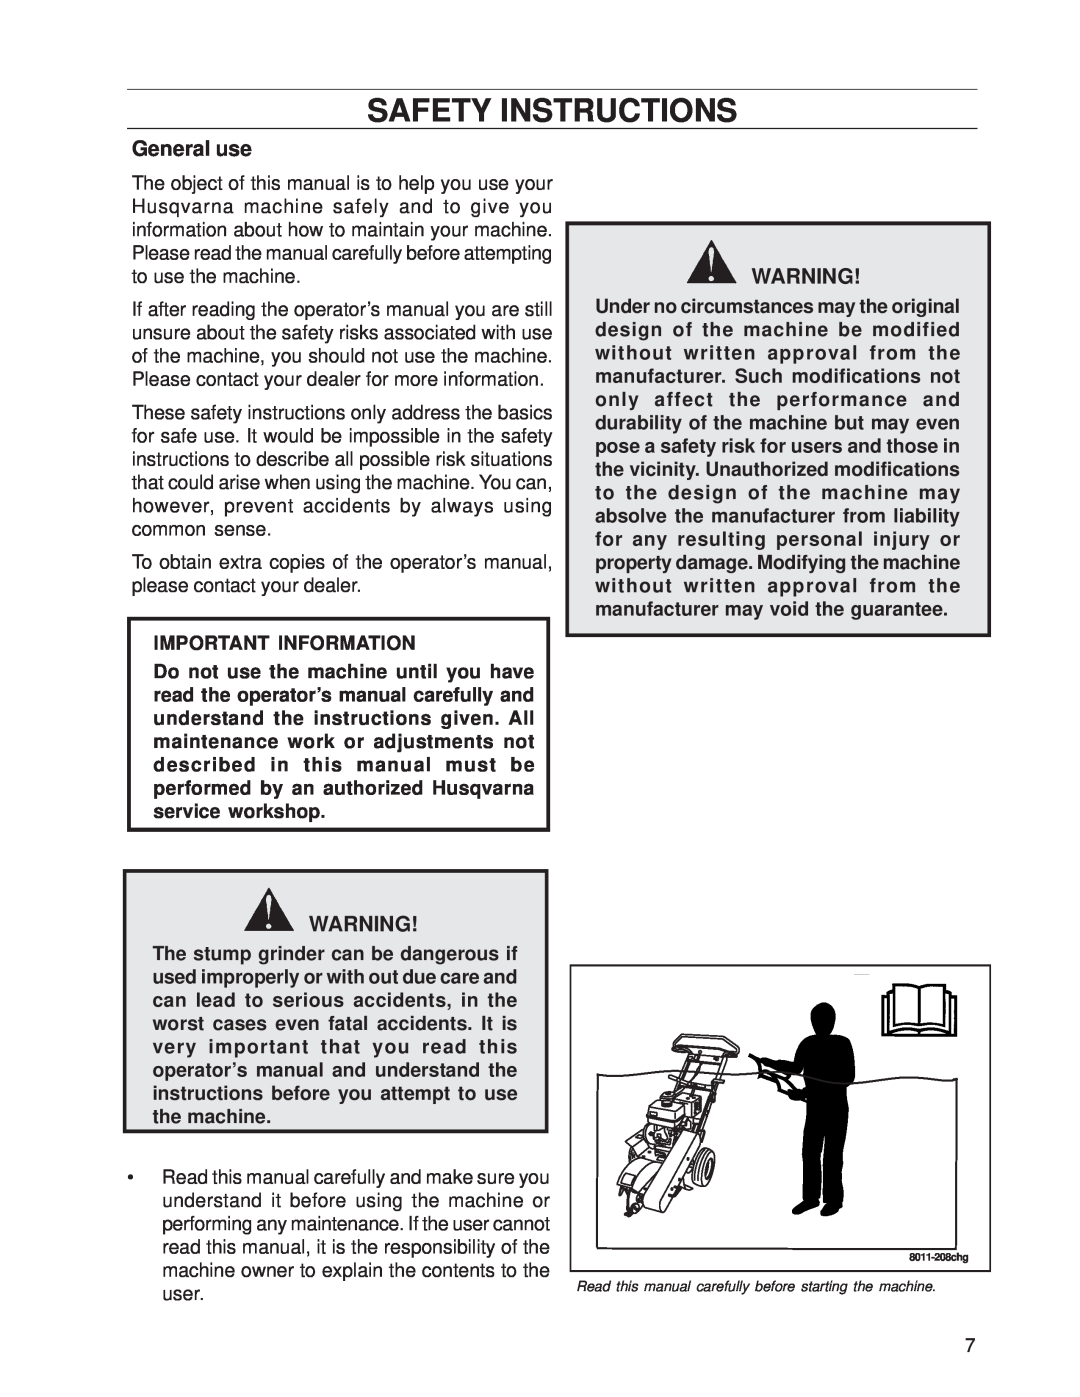 Husqvarna SG13/968999353, SG13A, SG13 manual Safety Instructions, General use, Important Information 